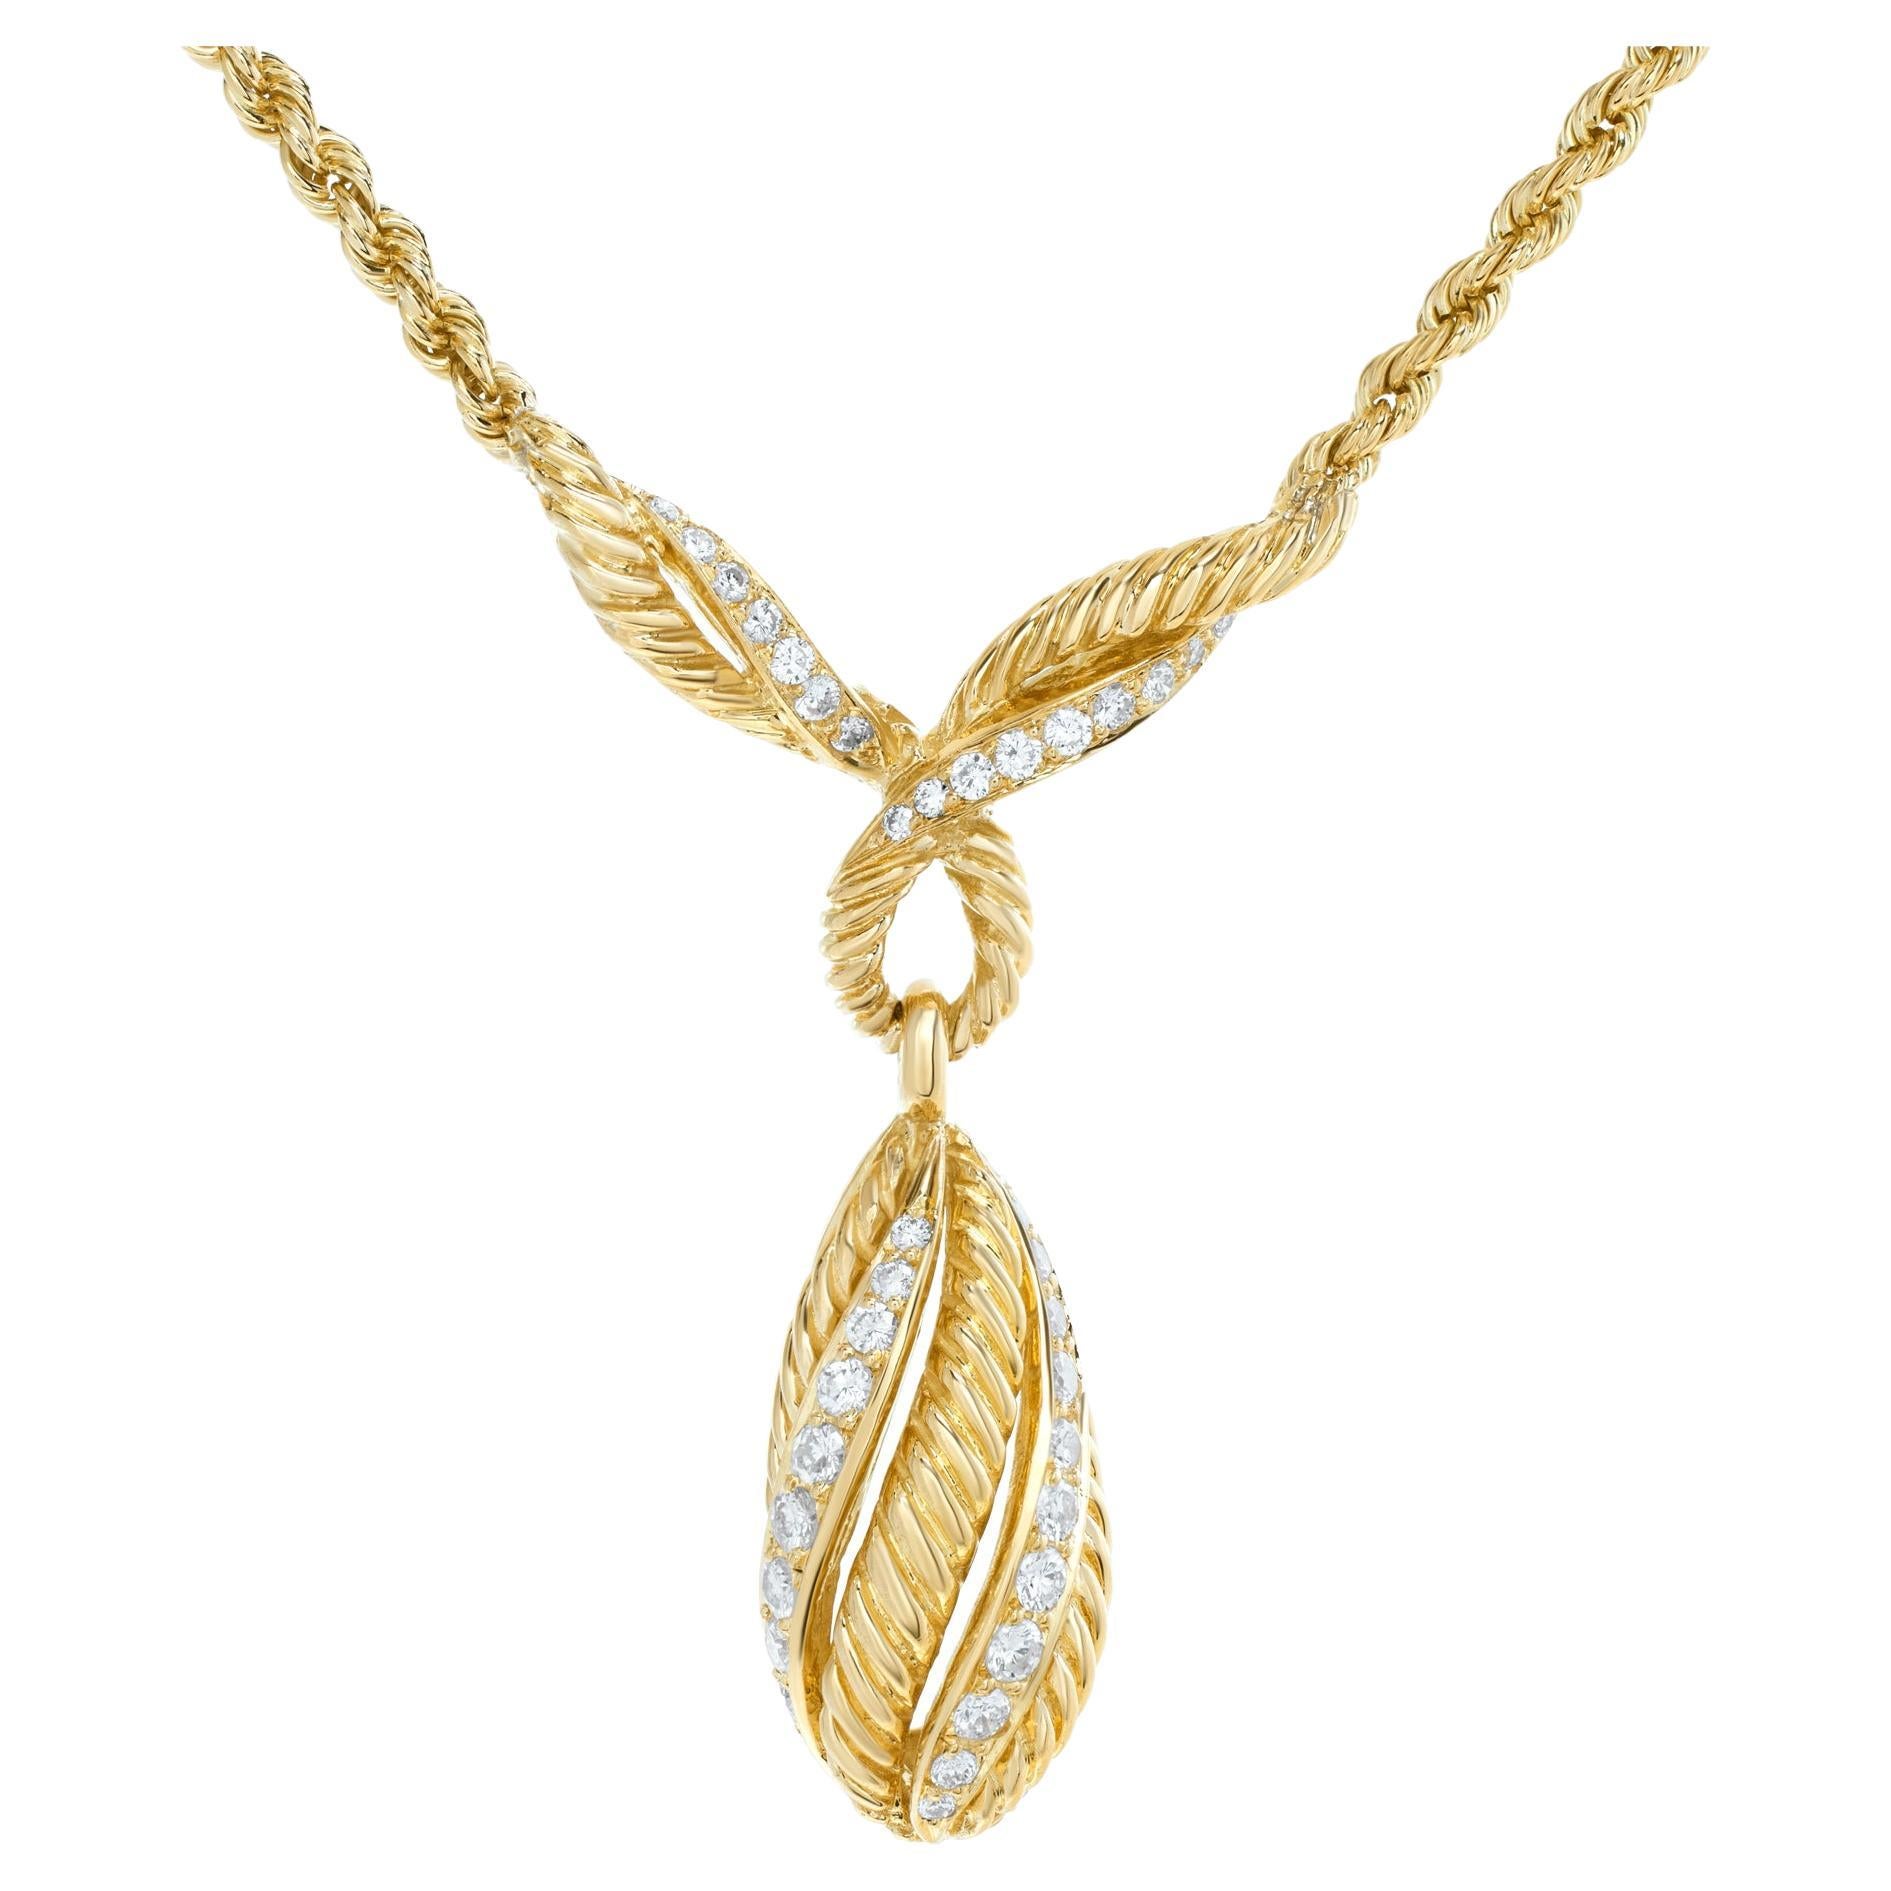 Diamond Drop Pendant Chain/Necklace Stamped "Cartier" in 18k Yellow Gold